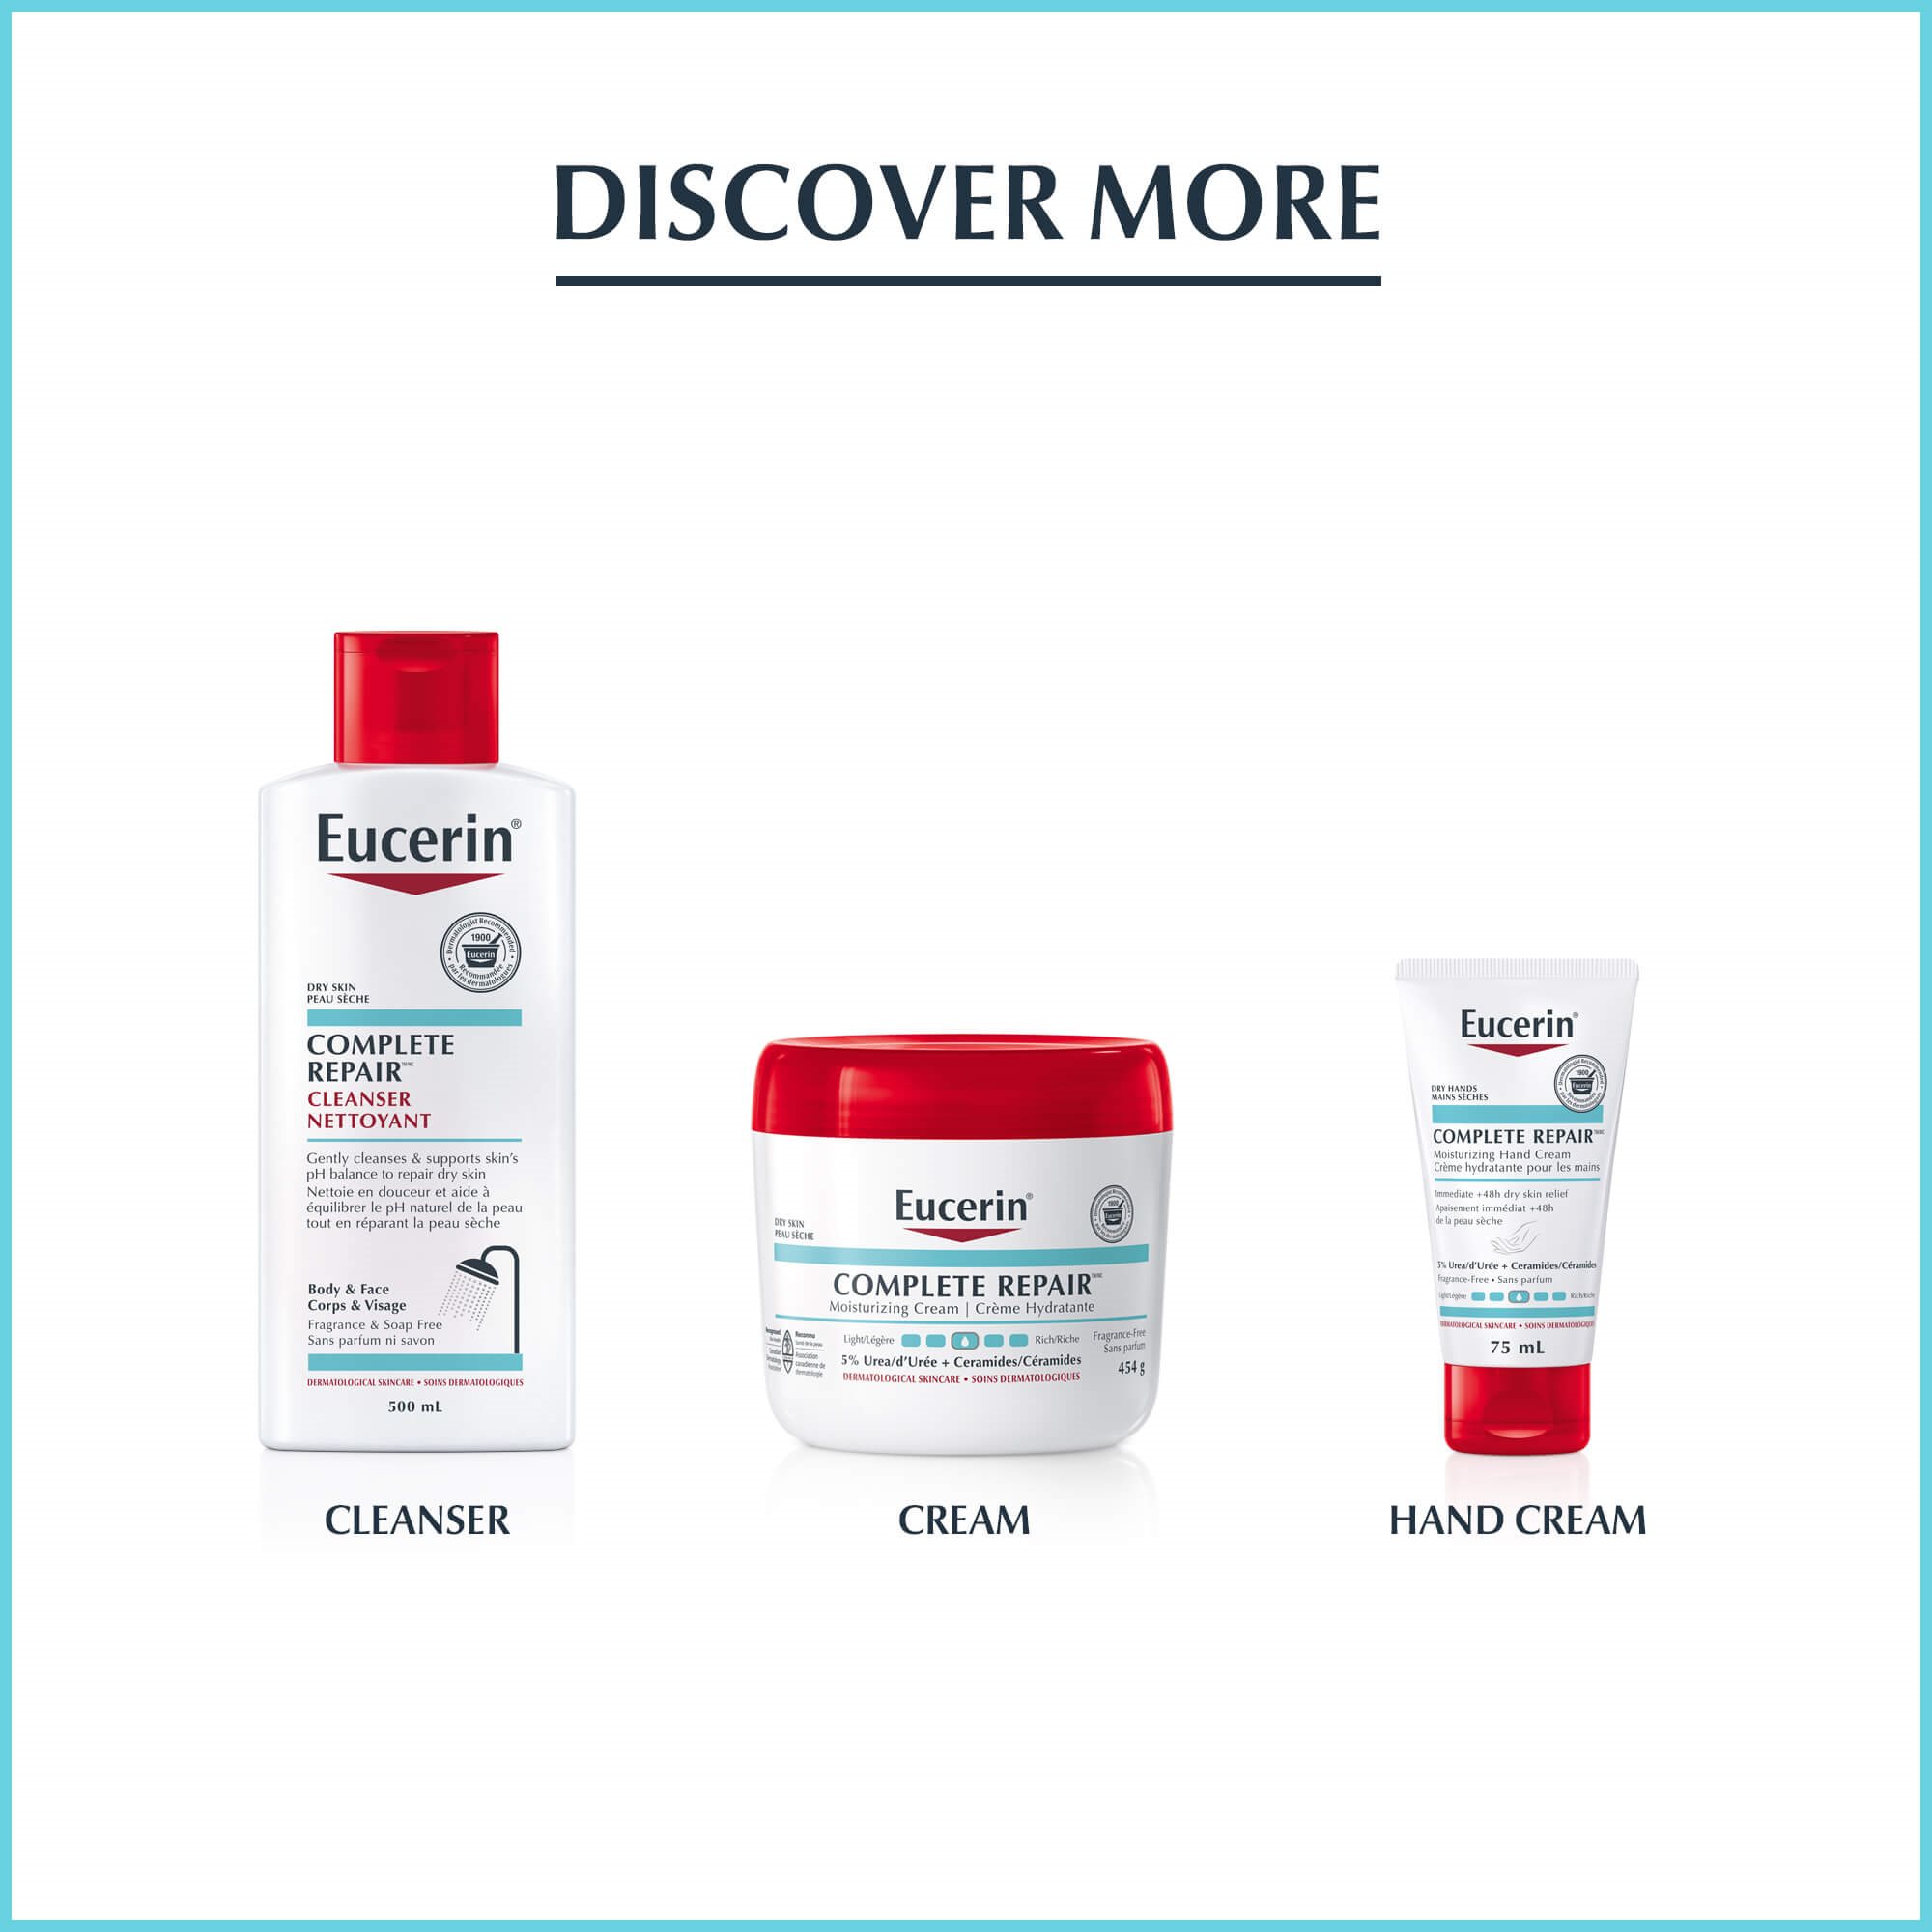 Image of the Eucerin cleanser, cream and hand cream from the Complete Repair line.